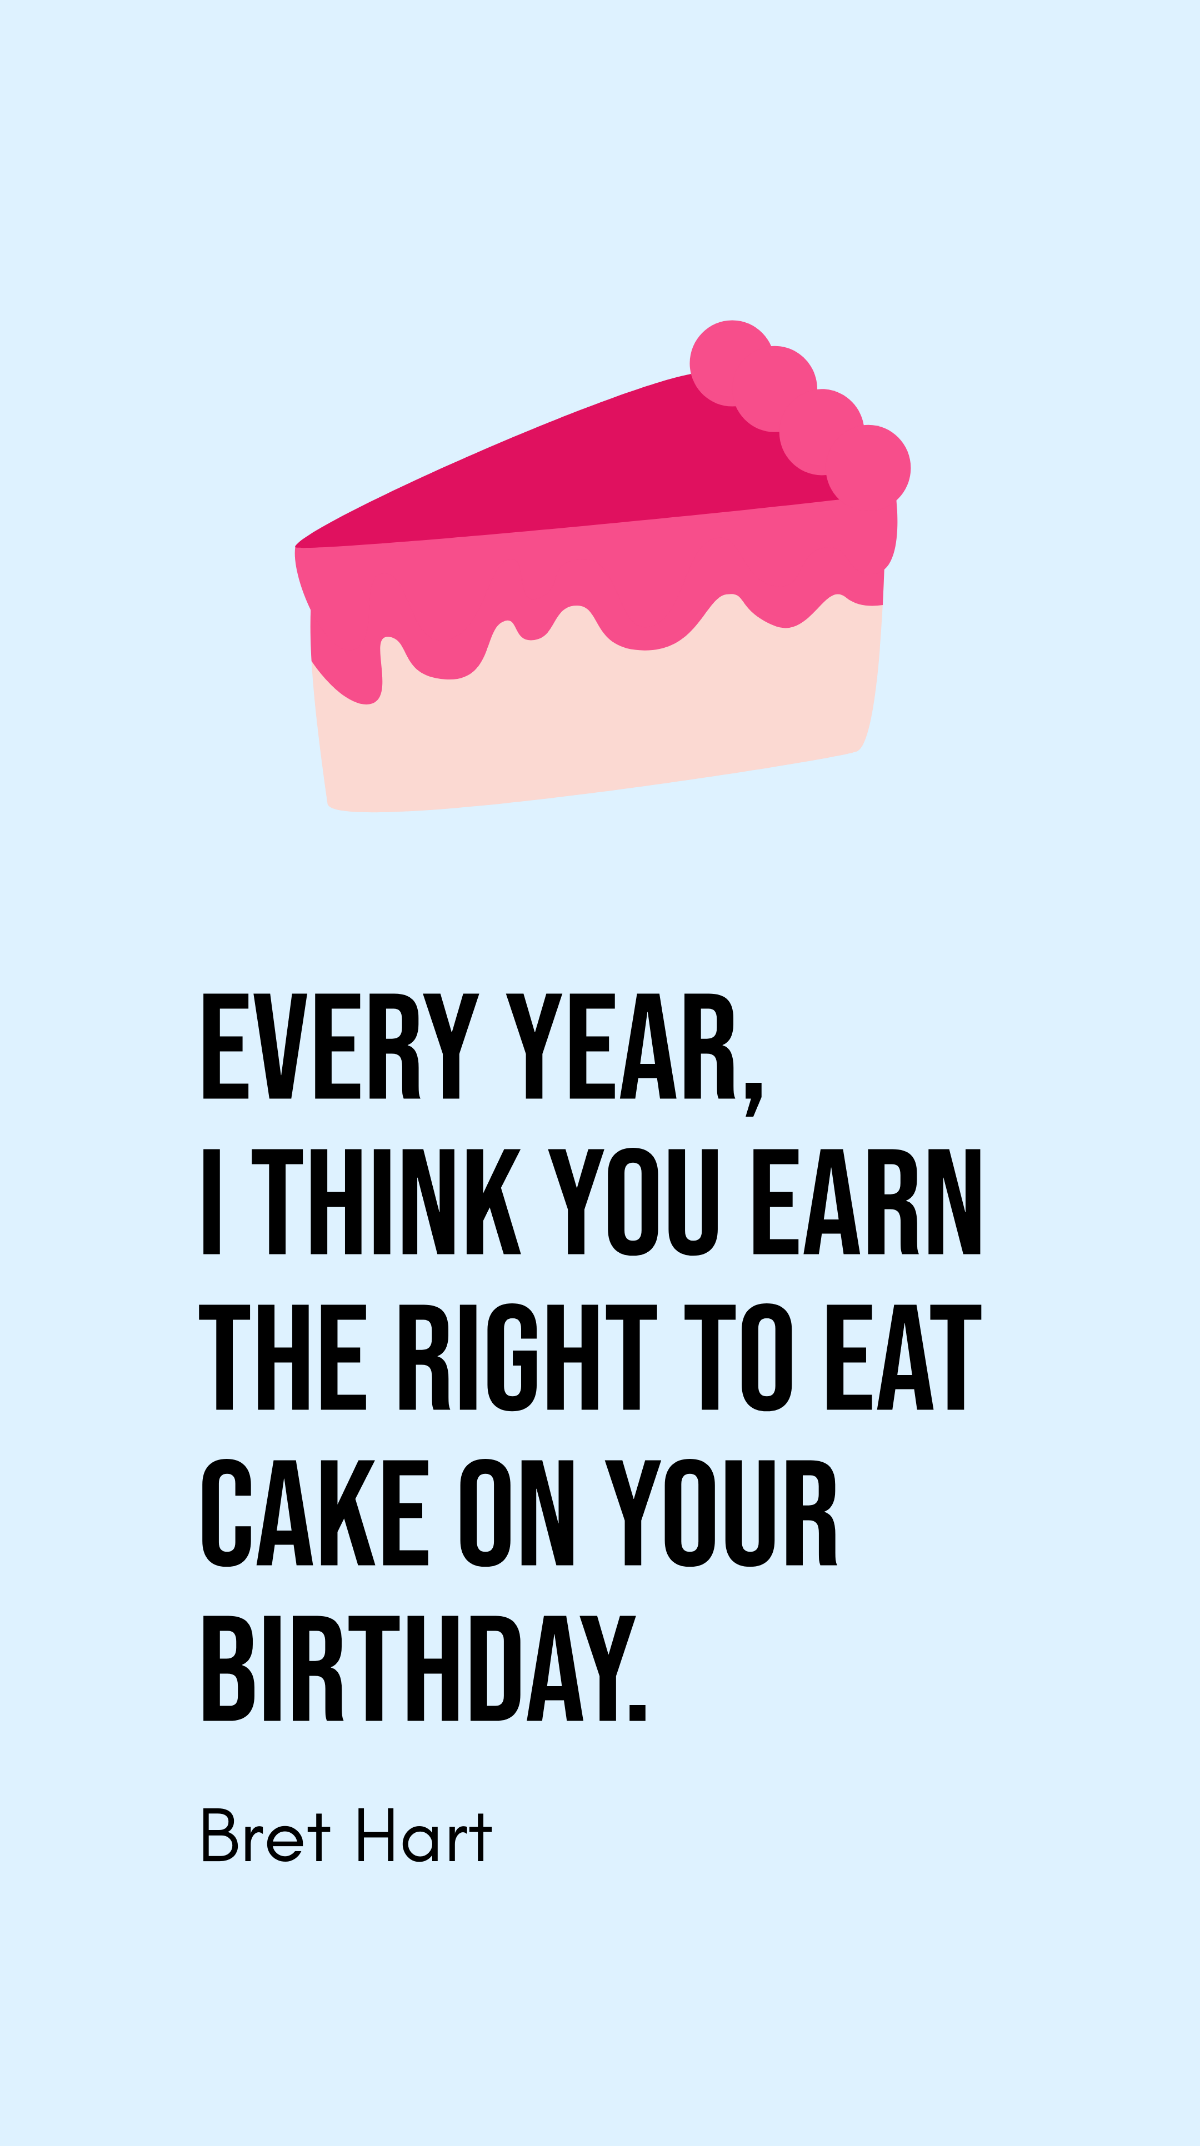 Bret Hart - Every year, I think you earn the right to eat cake on your birthday. Template